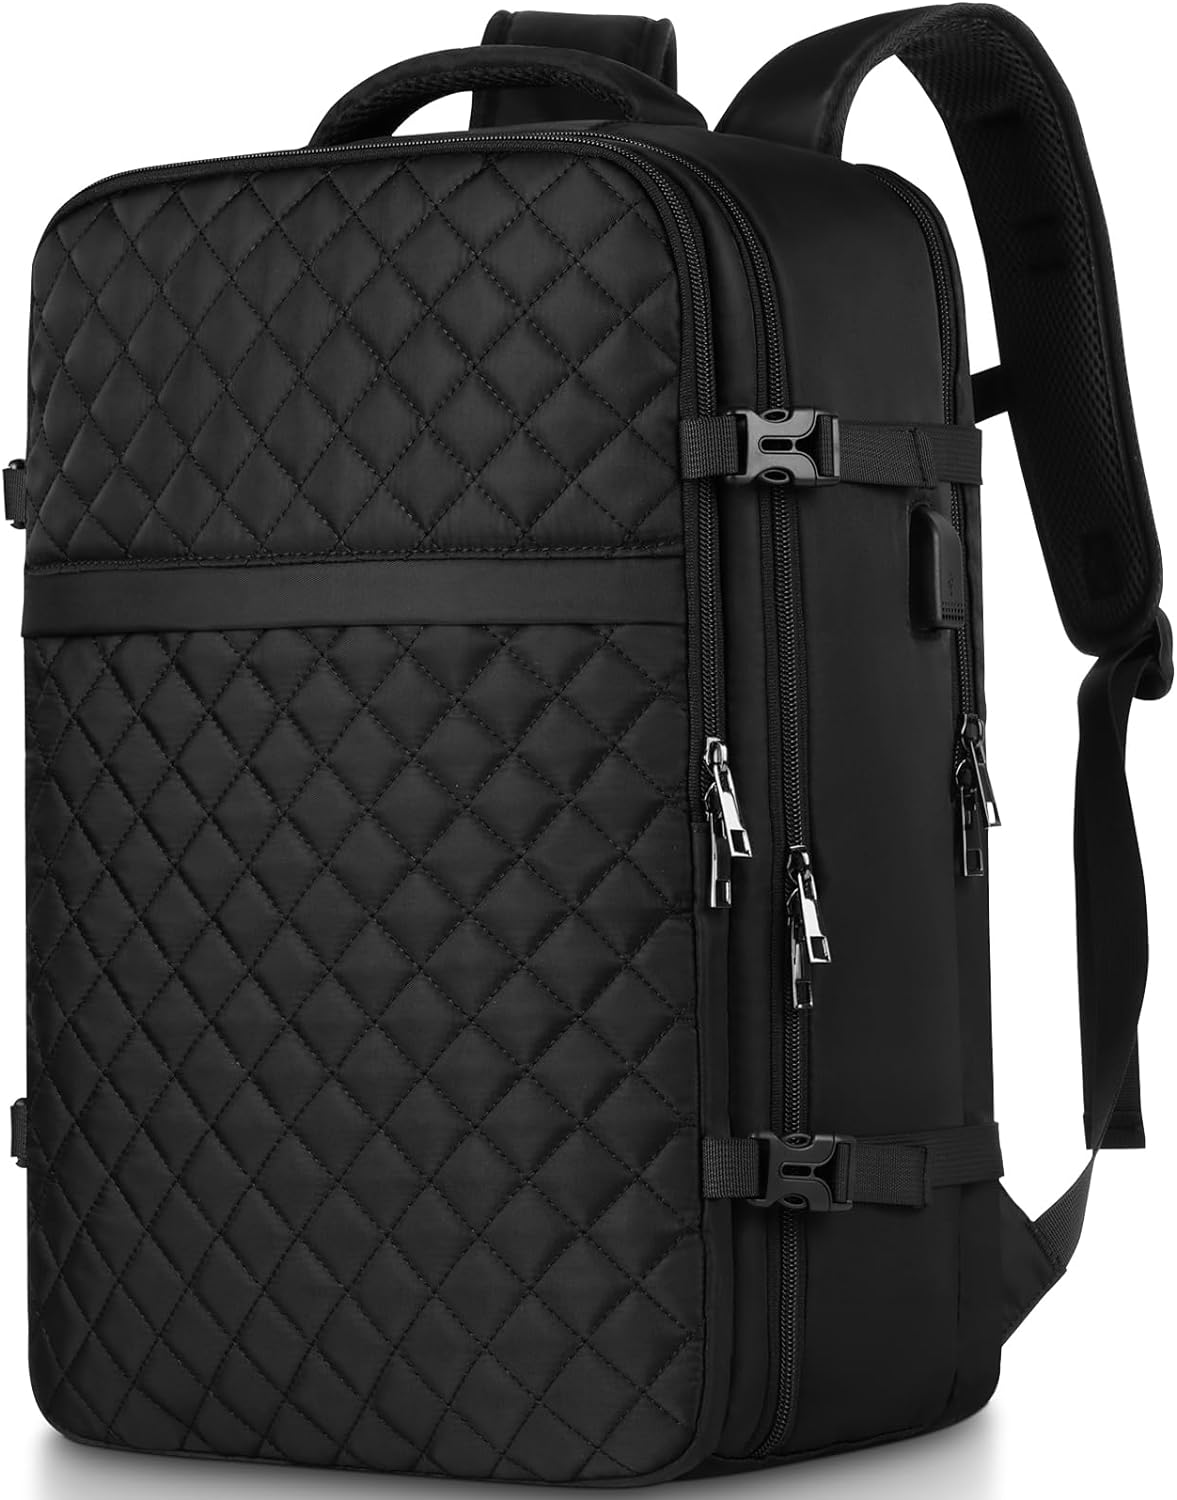 Big Size Travel Backpack Women, Flight Approved Carry on Backpack, Water Resistant Anti-Theft Casual Daypack School Bag Fit 17 Inch Laptop with USB Charging Port, Black